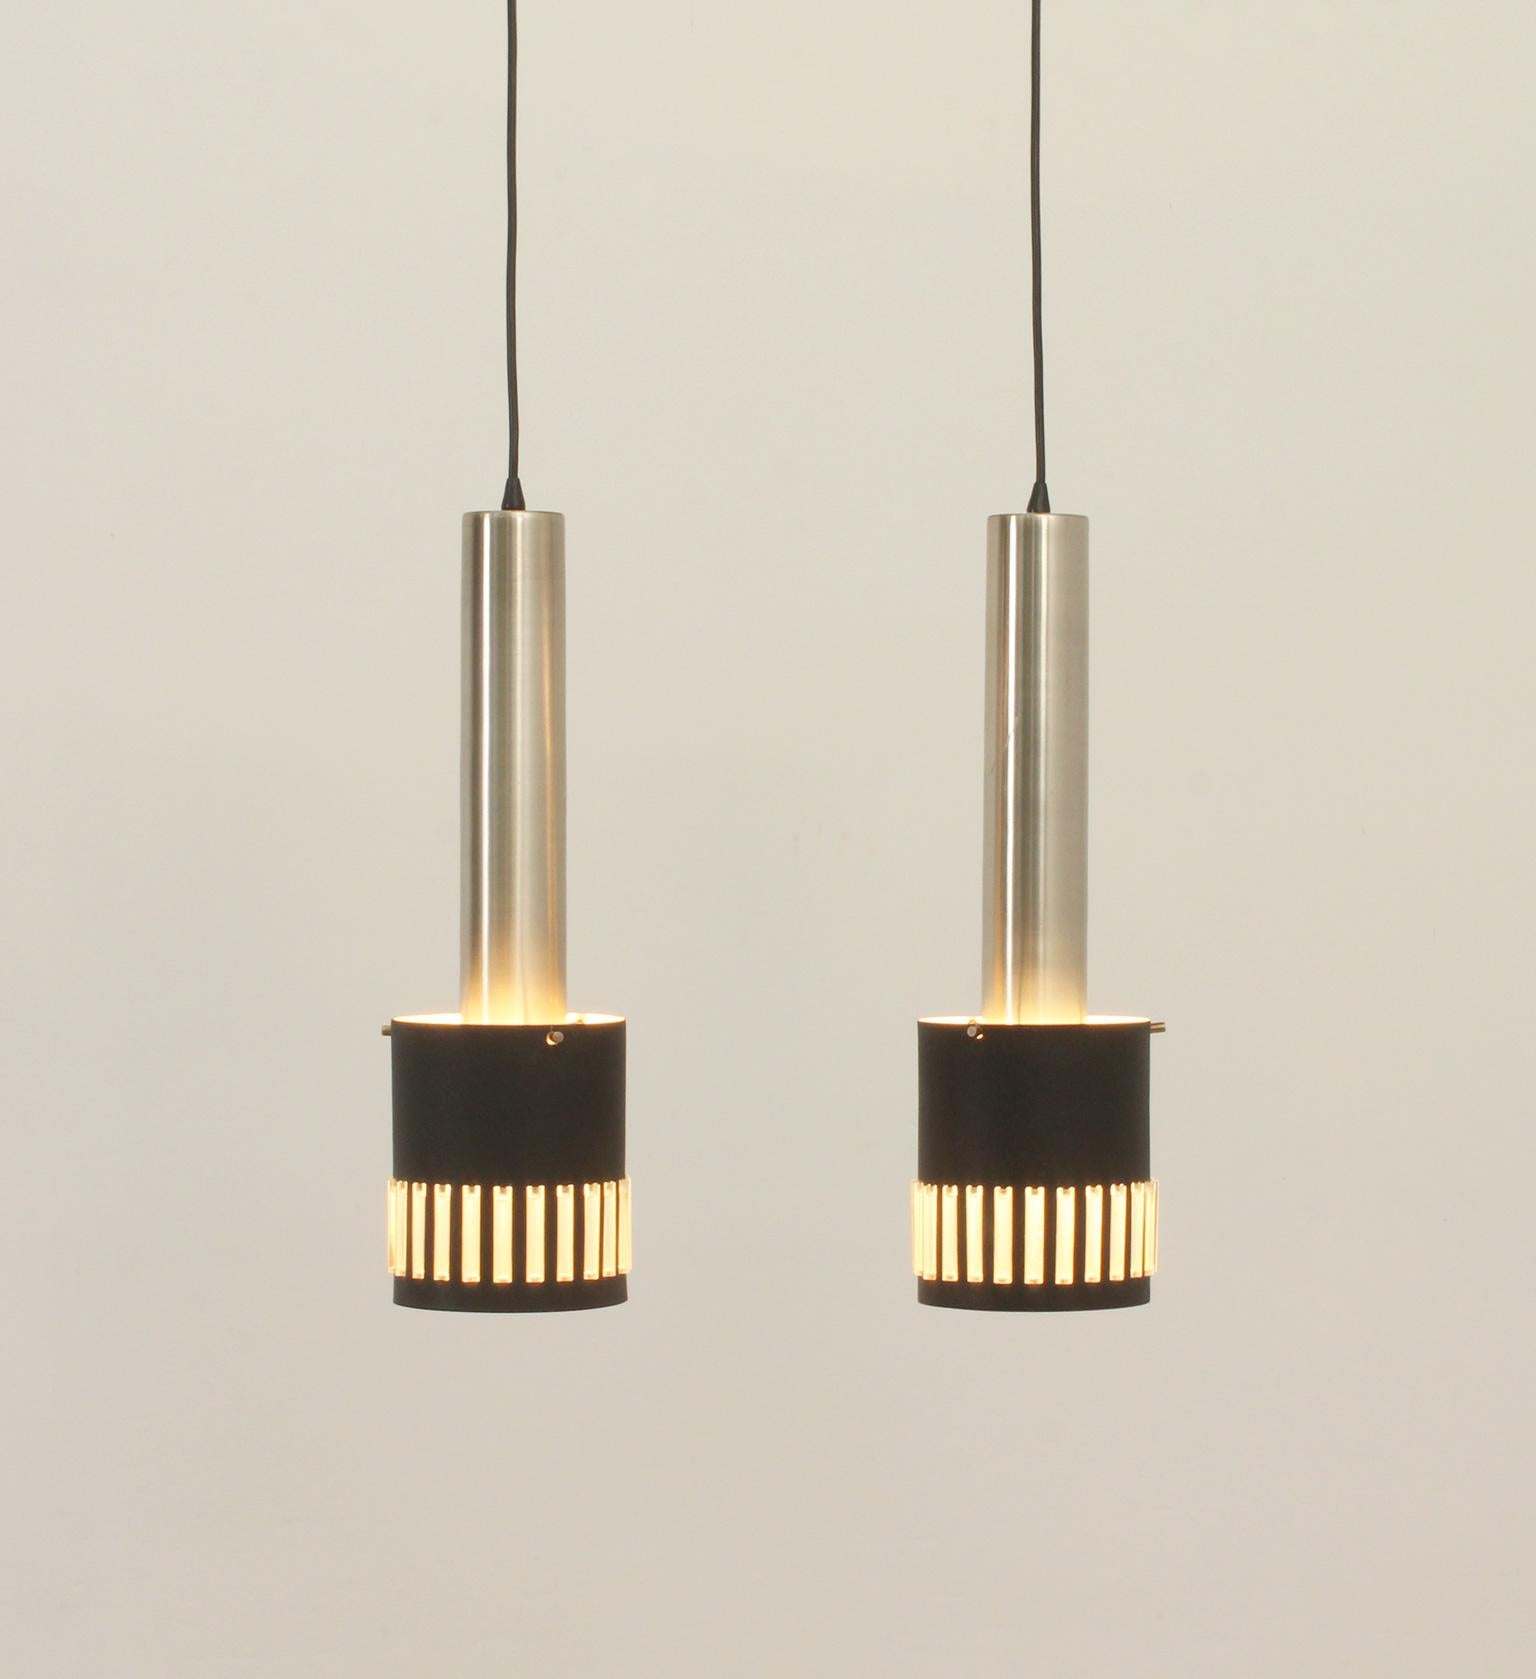 Pair of Pendant Lamps from 1960's, Spain For Sale 7